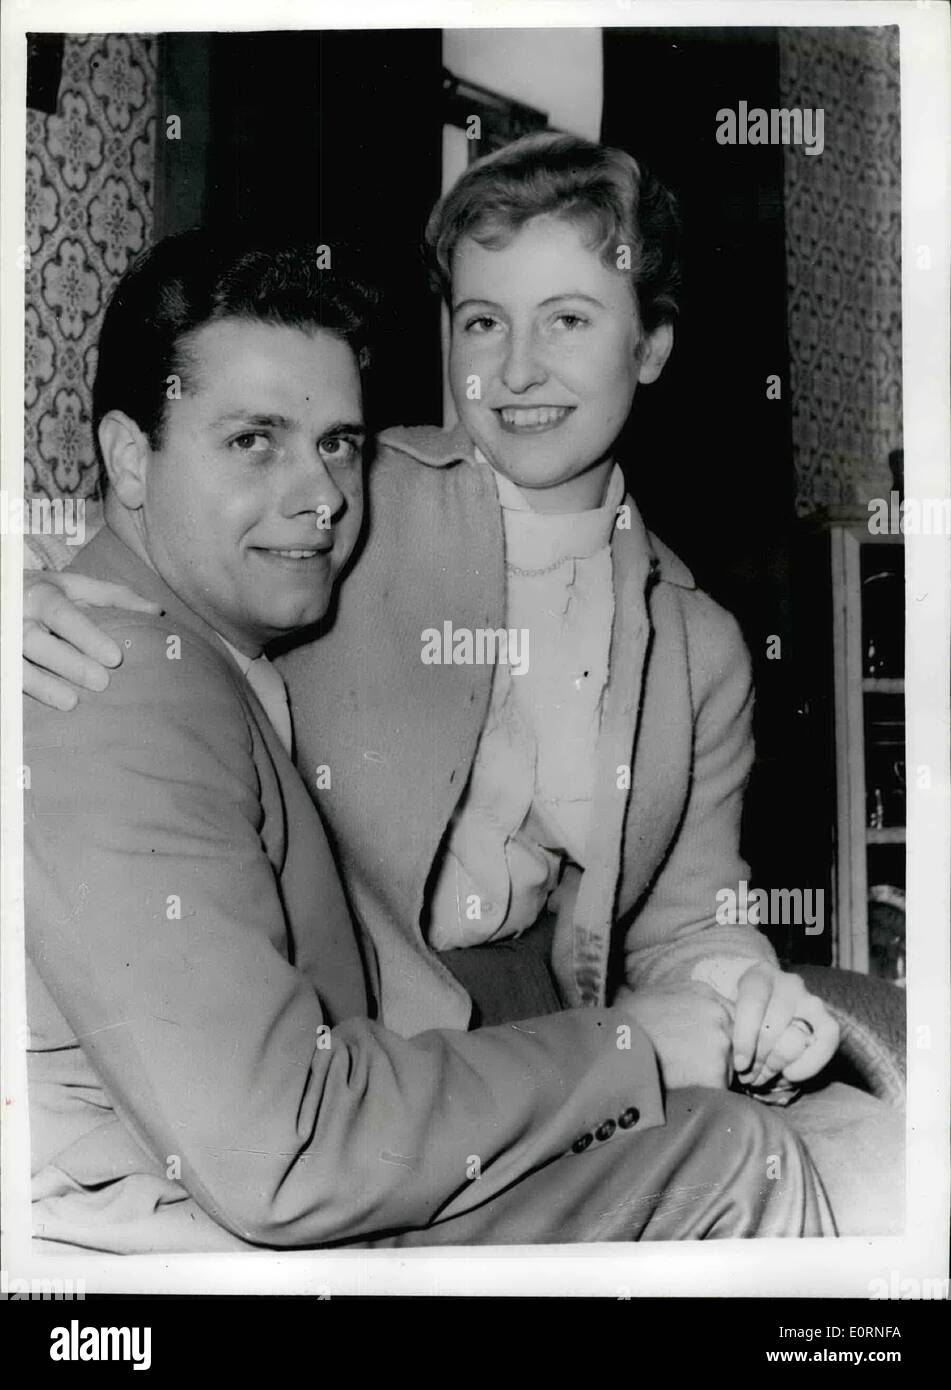 Feb. 02, 1960 - Handsome American gives up everything to marry a girl he had never seen: Twenty six year old Gil Sousa of Bad Axe, near Detroit, Michigan has given up his home a ,000 a year job - to come to Europe to marry a girl he had never seen. The girl is lovely Rosemary Weirich a 20 year old typist of Bemen, Germany. He fell in love with a photograph of Rosemary, given him by a friend. They corresponded for six months and after 150 letters has passed between these he decided to come to Europe - for his Rosemary Stock Photo